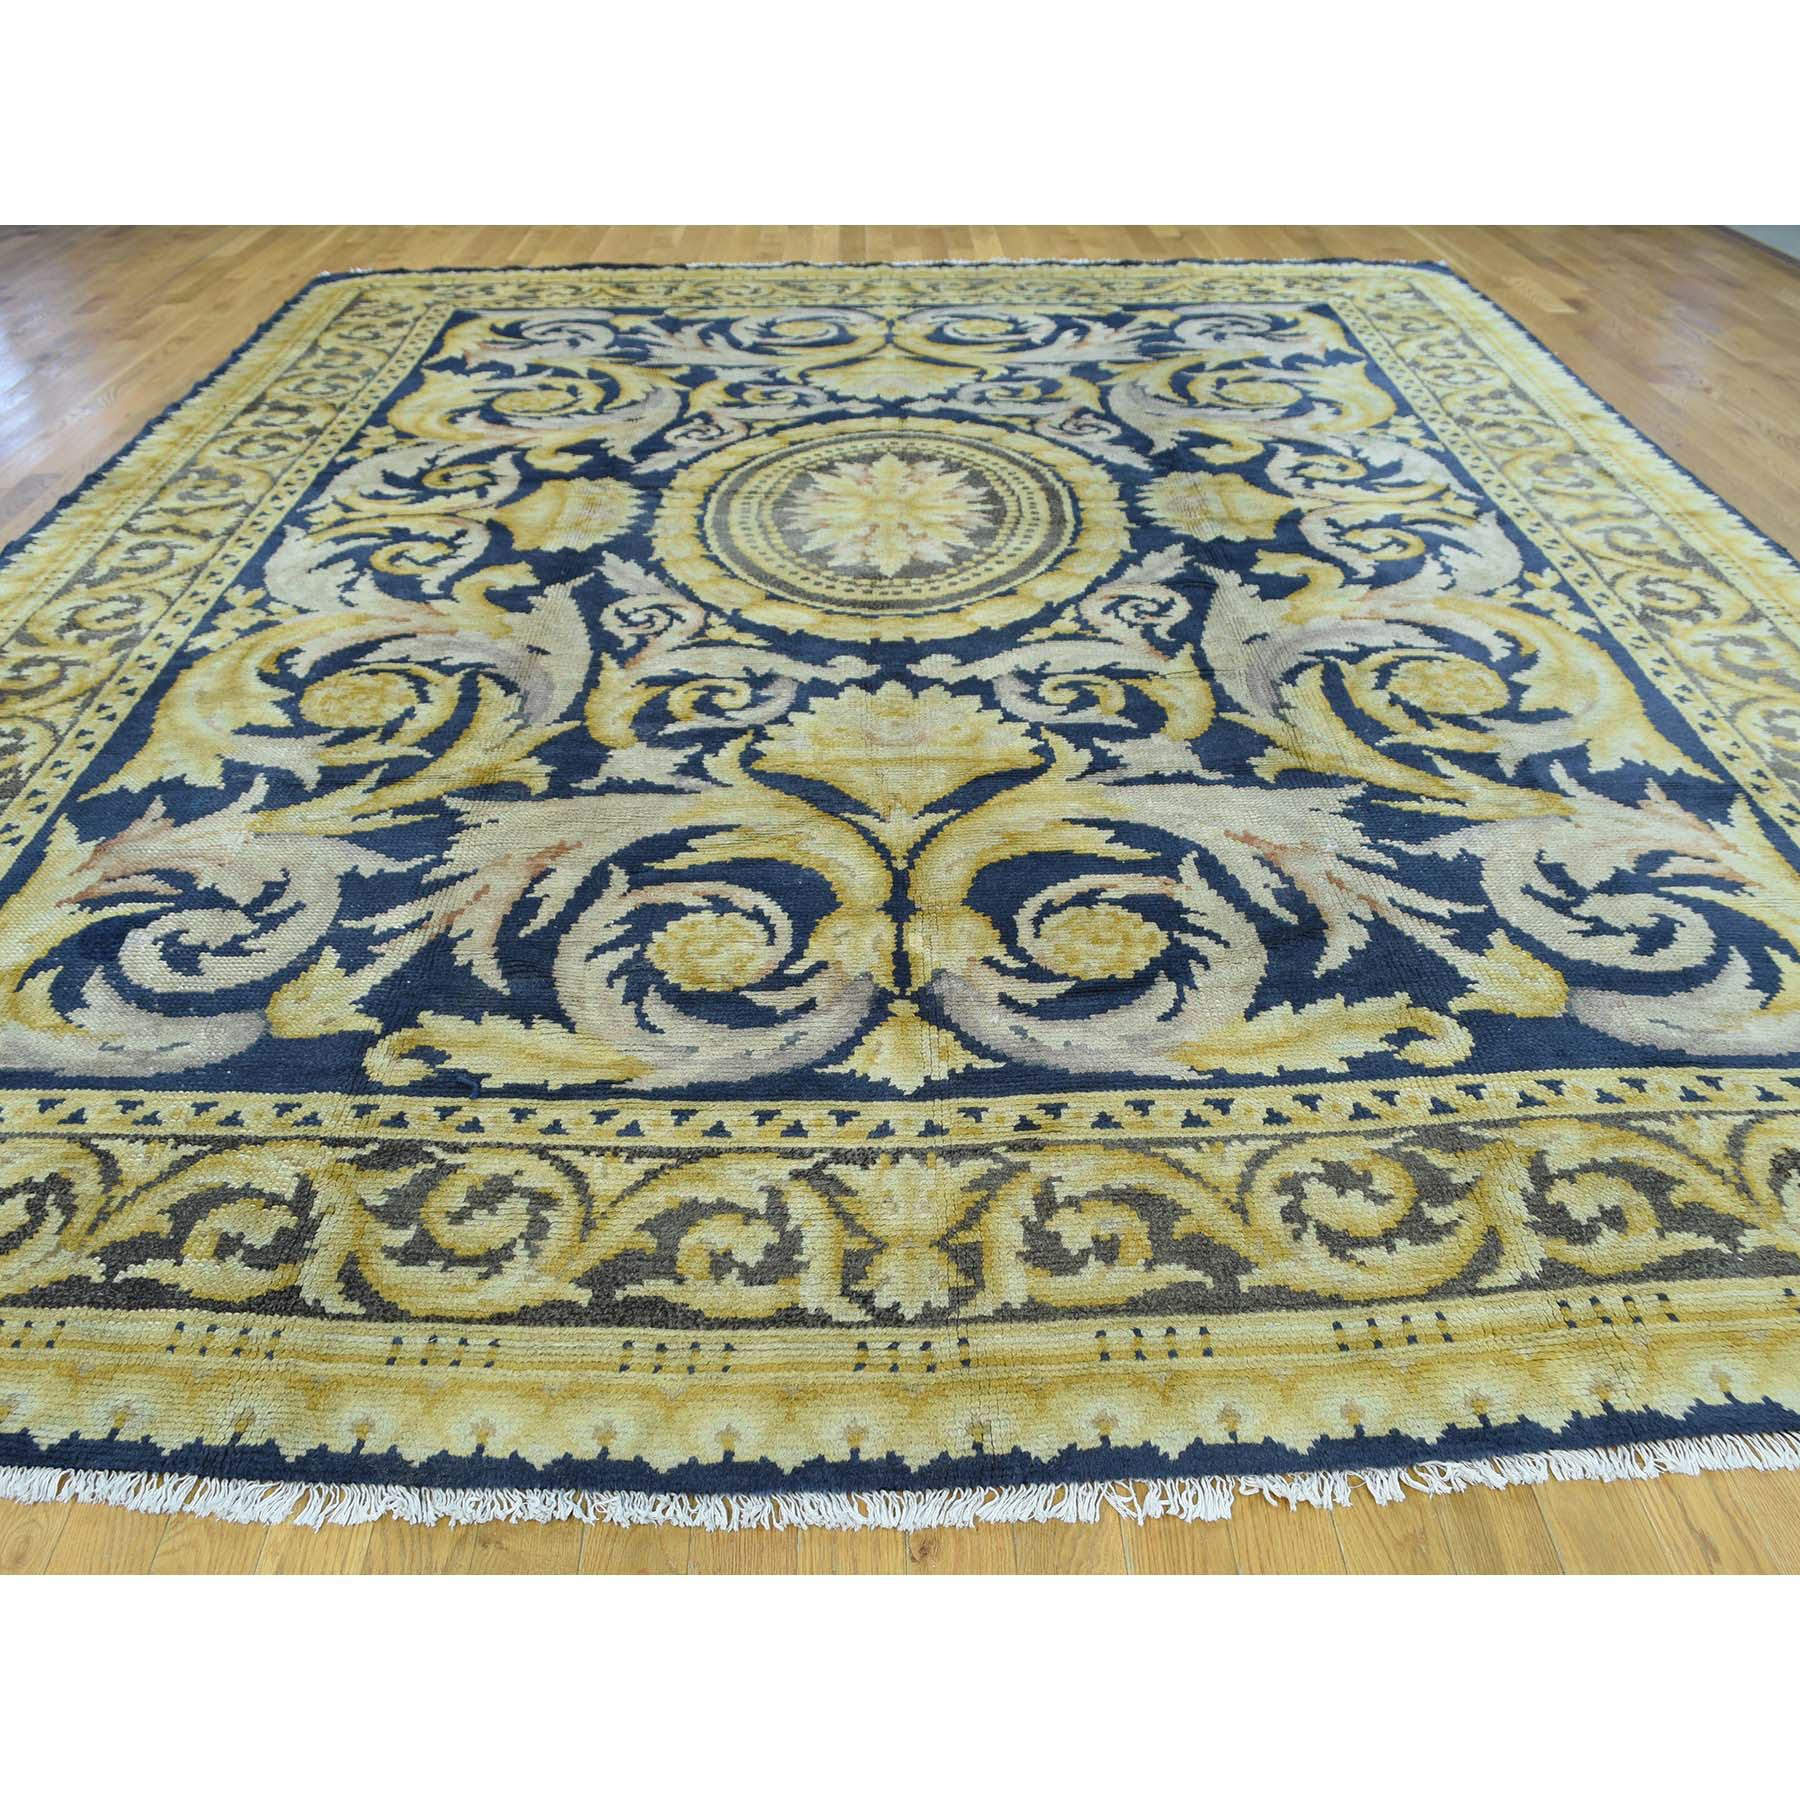 This is a truly genuine one-of-a-kind Old Spanish Savonnerie Exc Cond Hand-Knotted Oversize Rug. It has been Knotted for months and months in the centuries-old Persian weaving craftsmanship techniques by expert artisans.
 
 Primary materials: Wool
